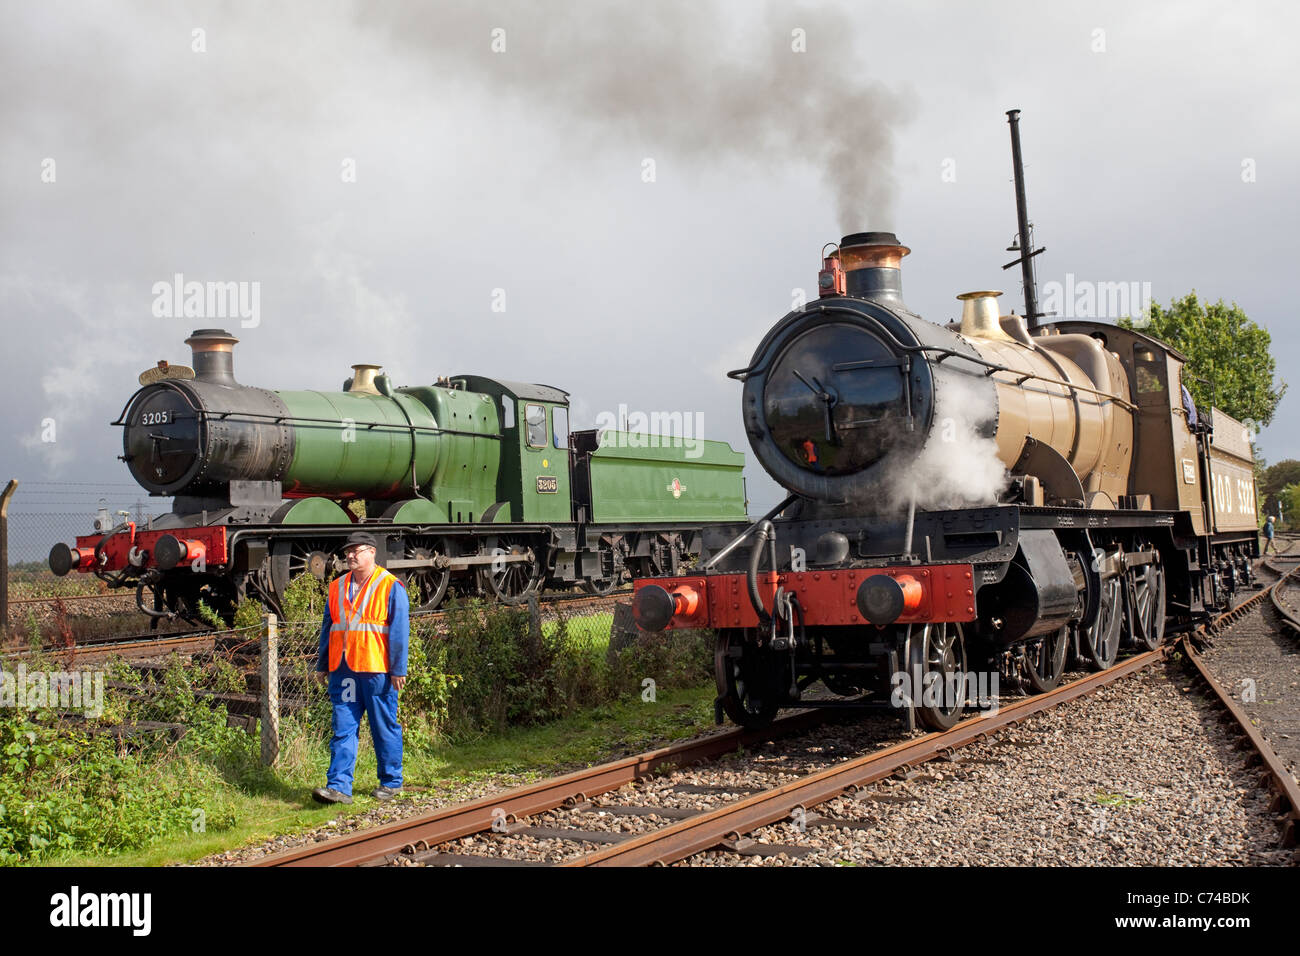 two steam trains Stock Photo